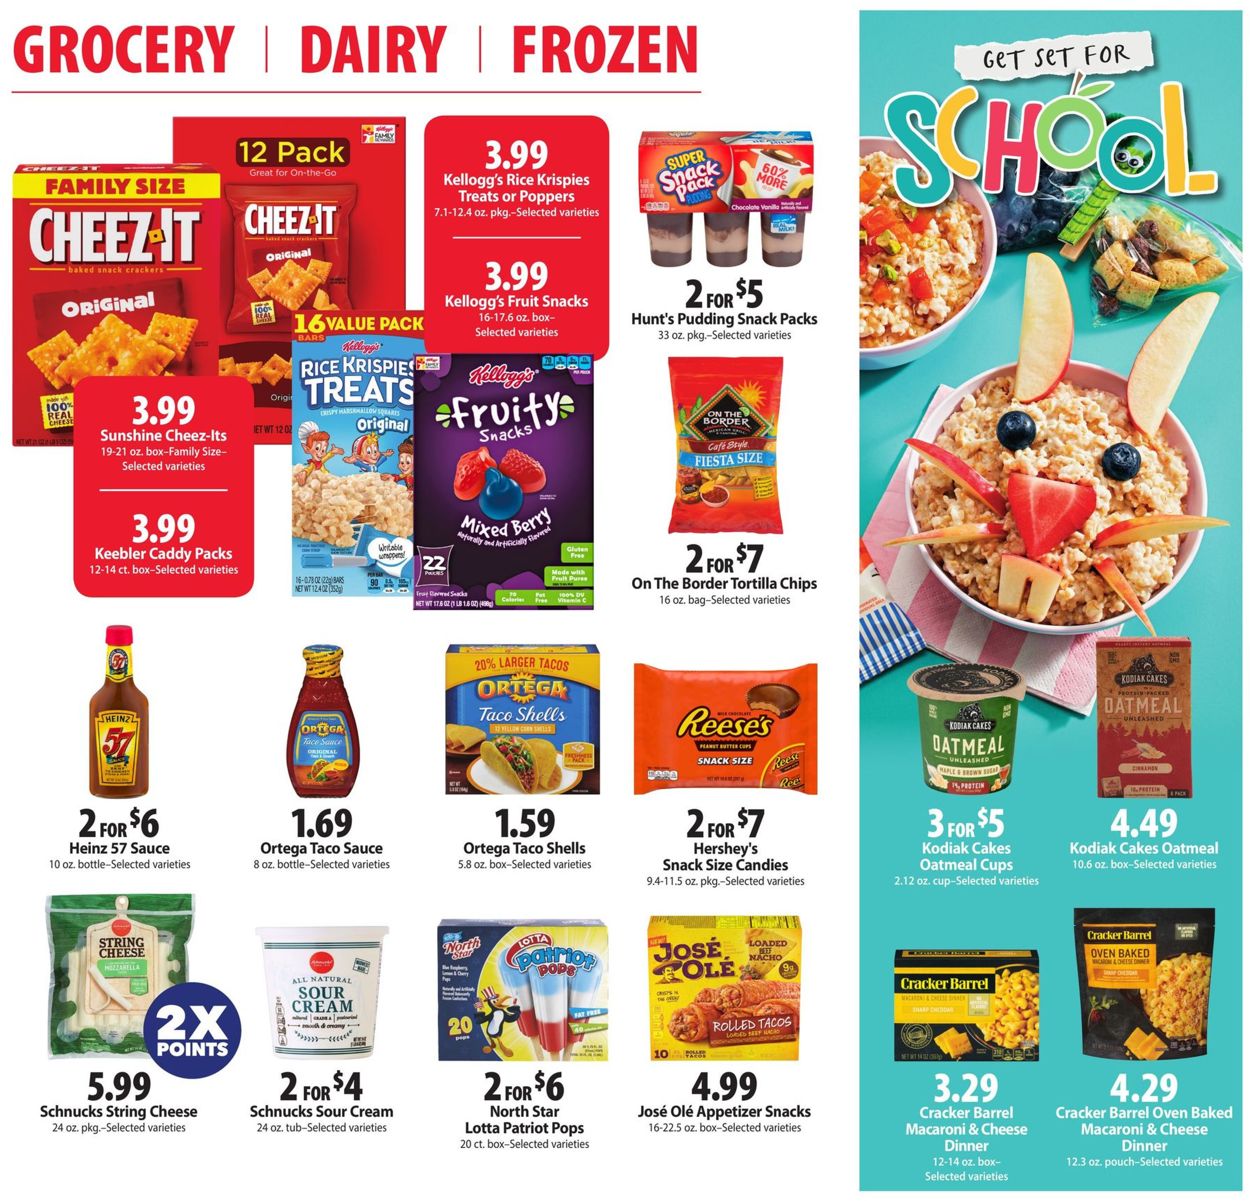 Schnucks Current weekly ad 08/21 - 08/27/2019 [5] - frequent-ads.com